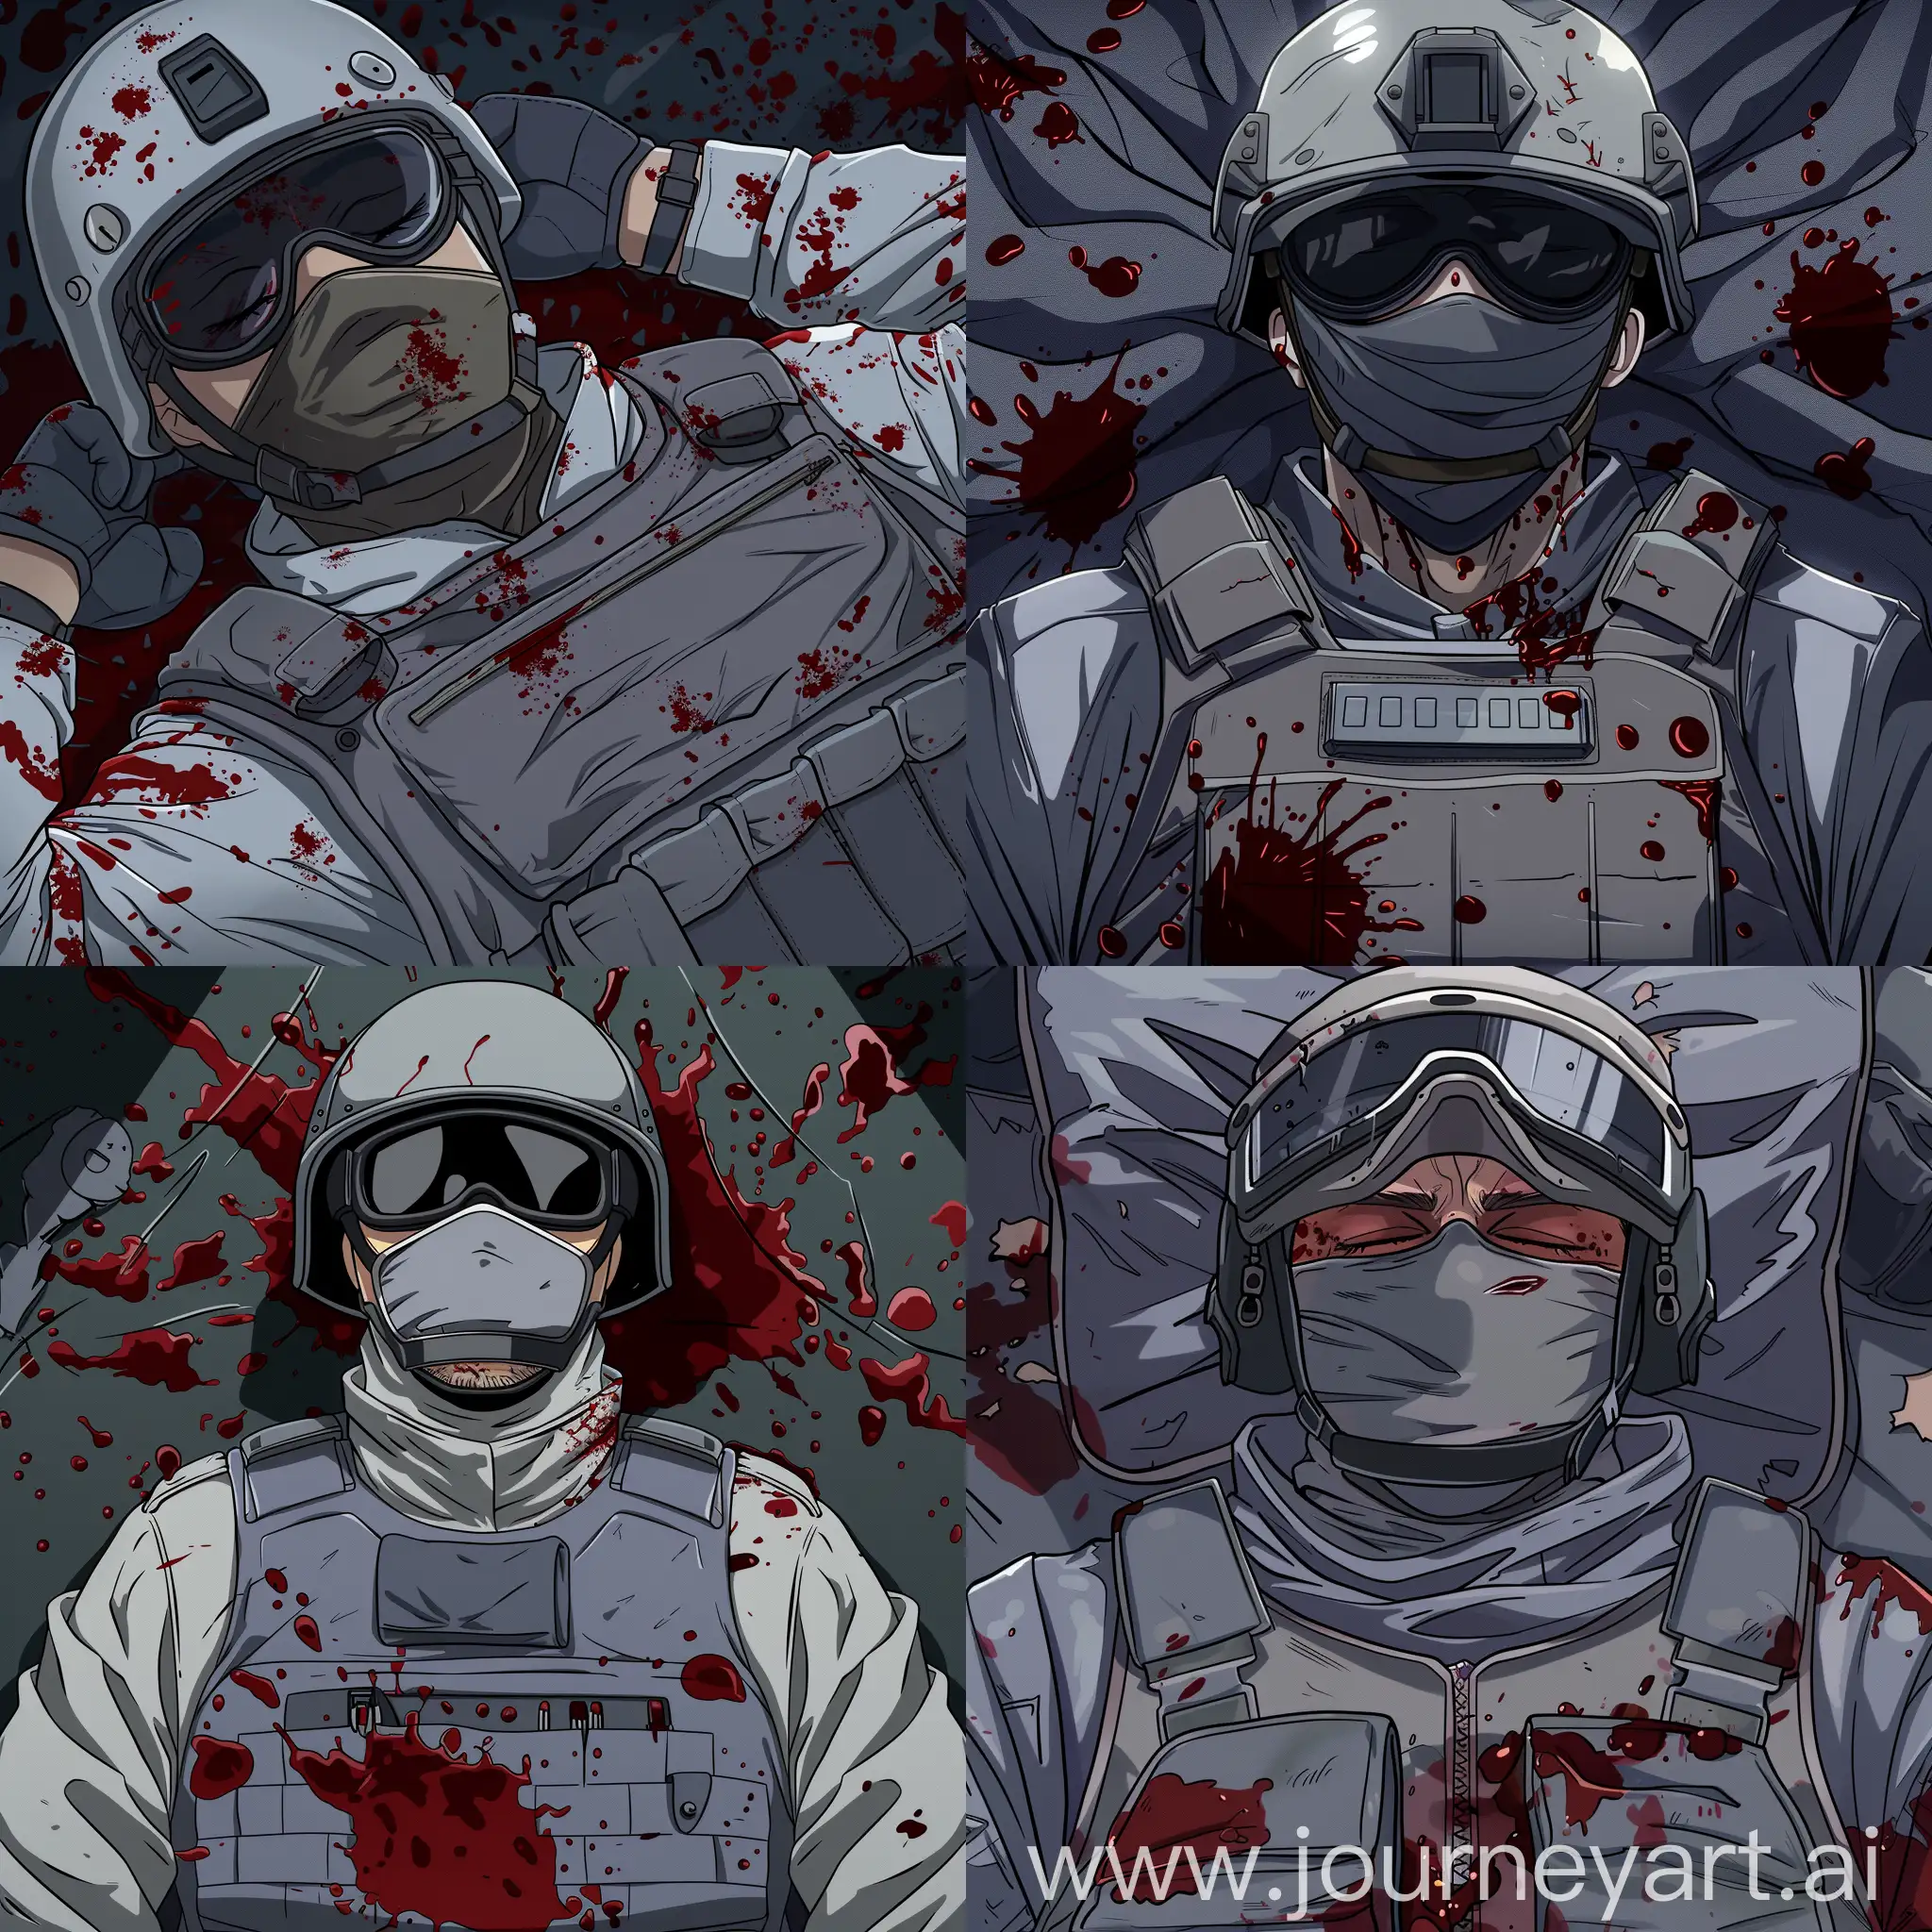 Security-Officer-Corpse-in-Anime-Style-Bloodied-Victim-in-Gray-Uniform